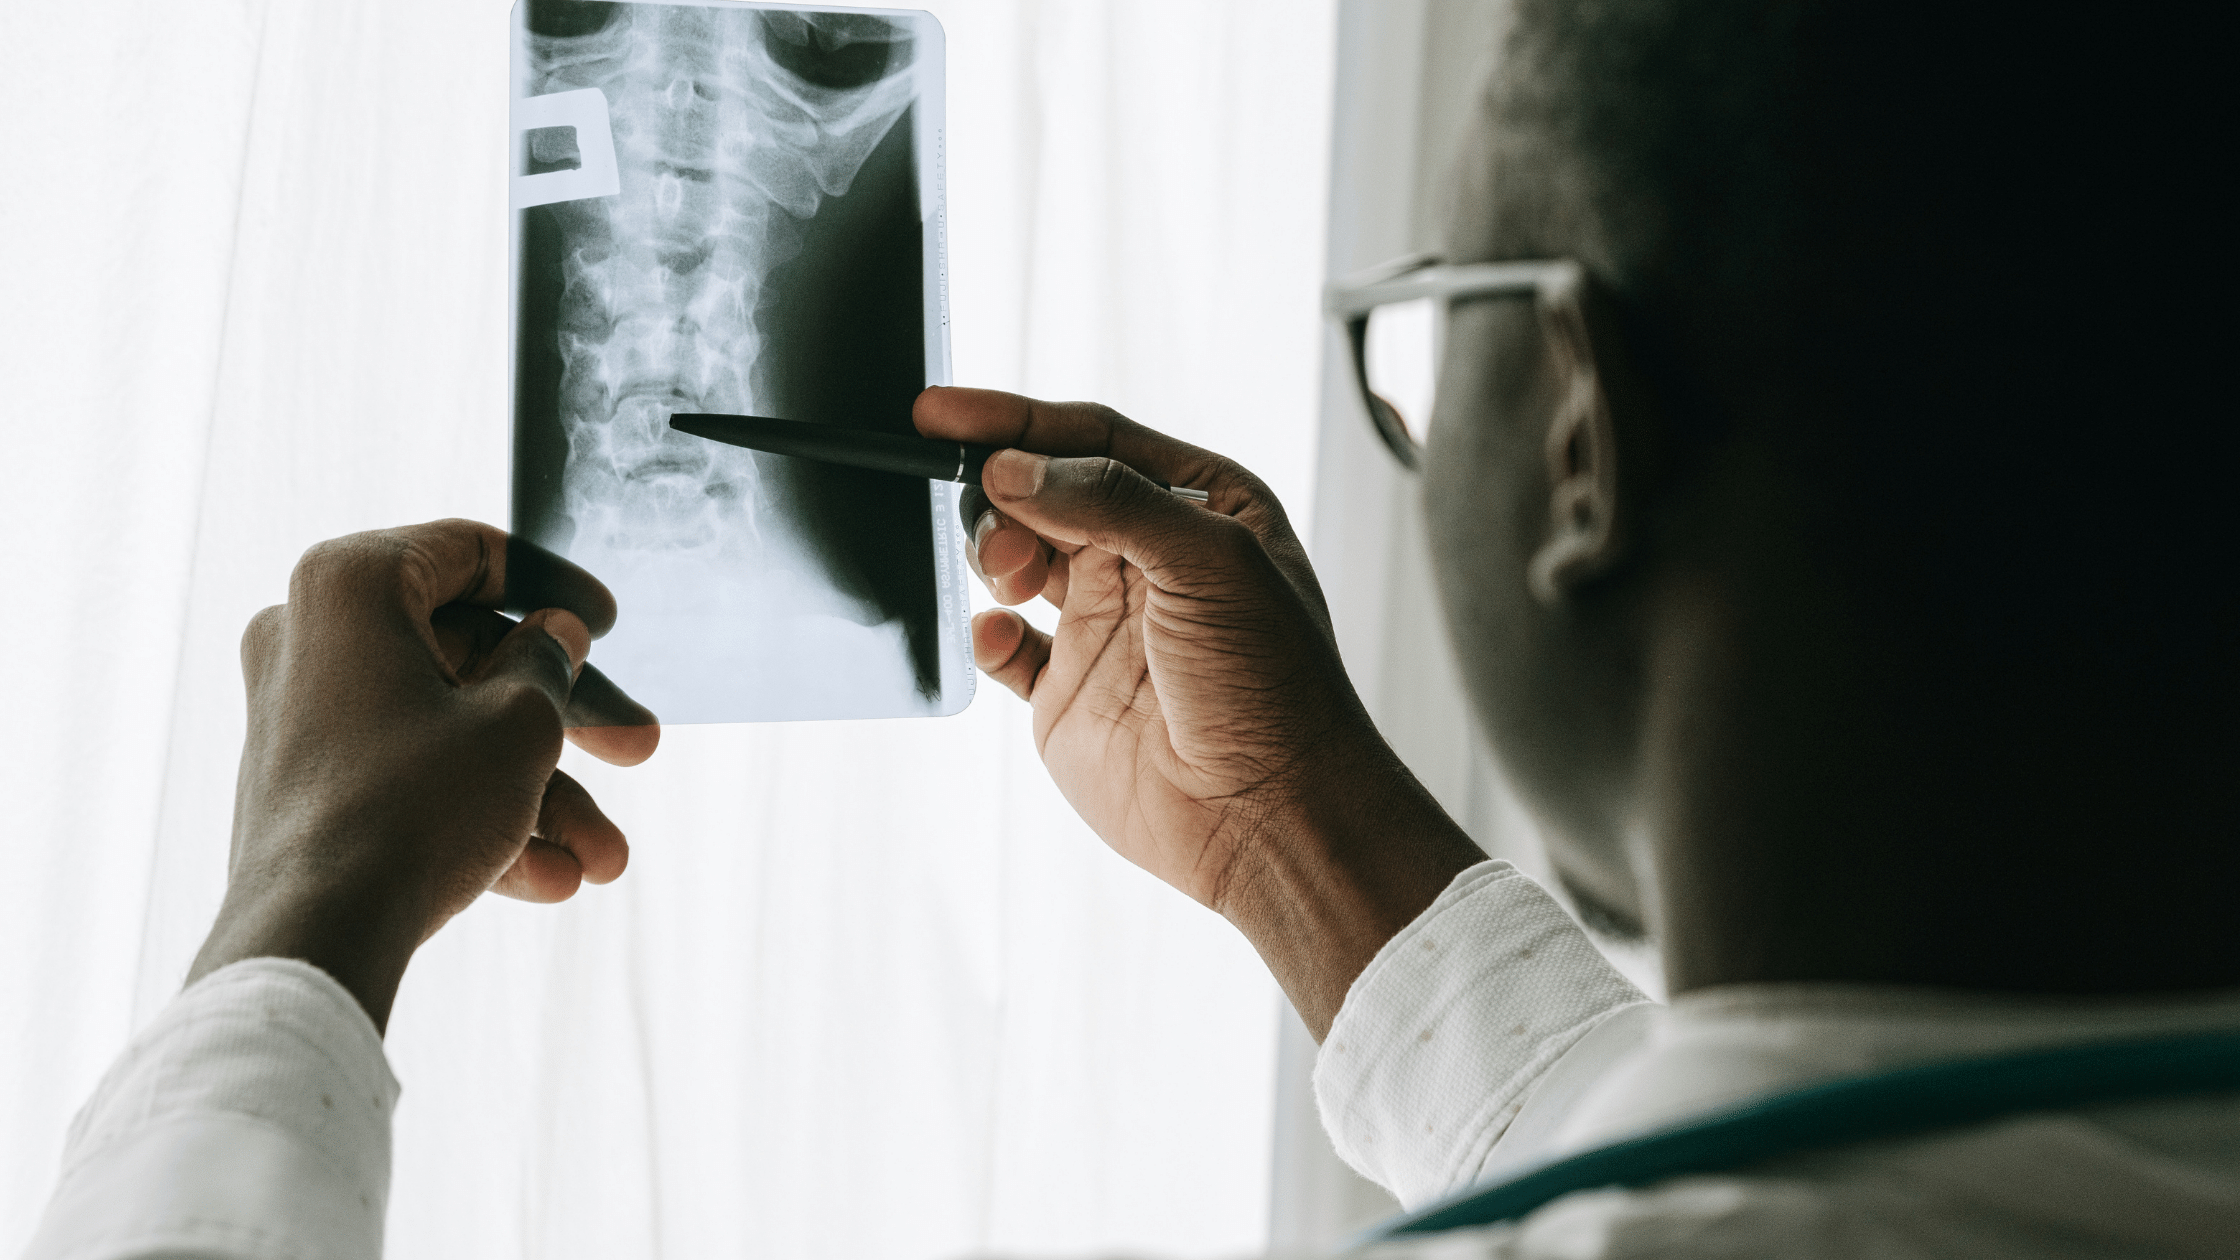 MRI vs. X-Ray vs. CT Scan: Which Is Right For Me?